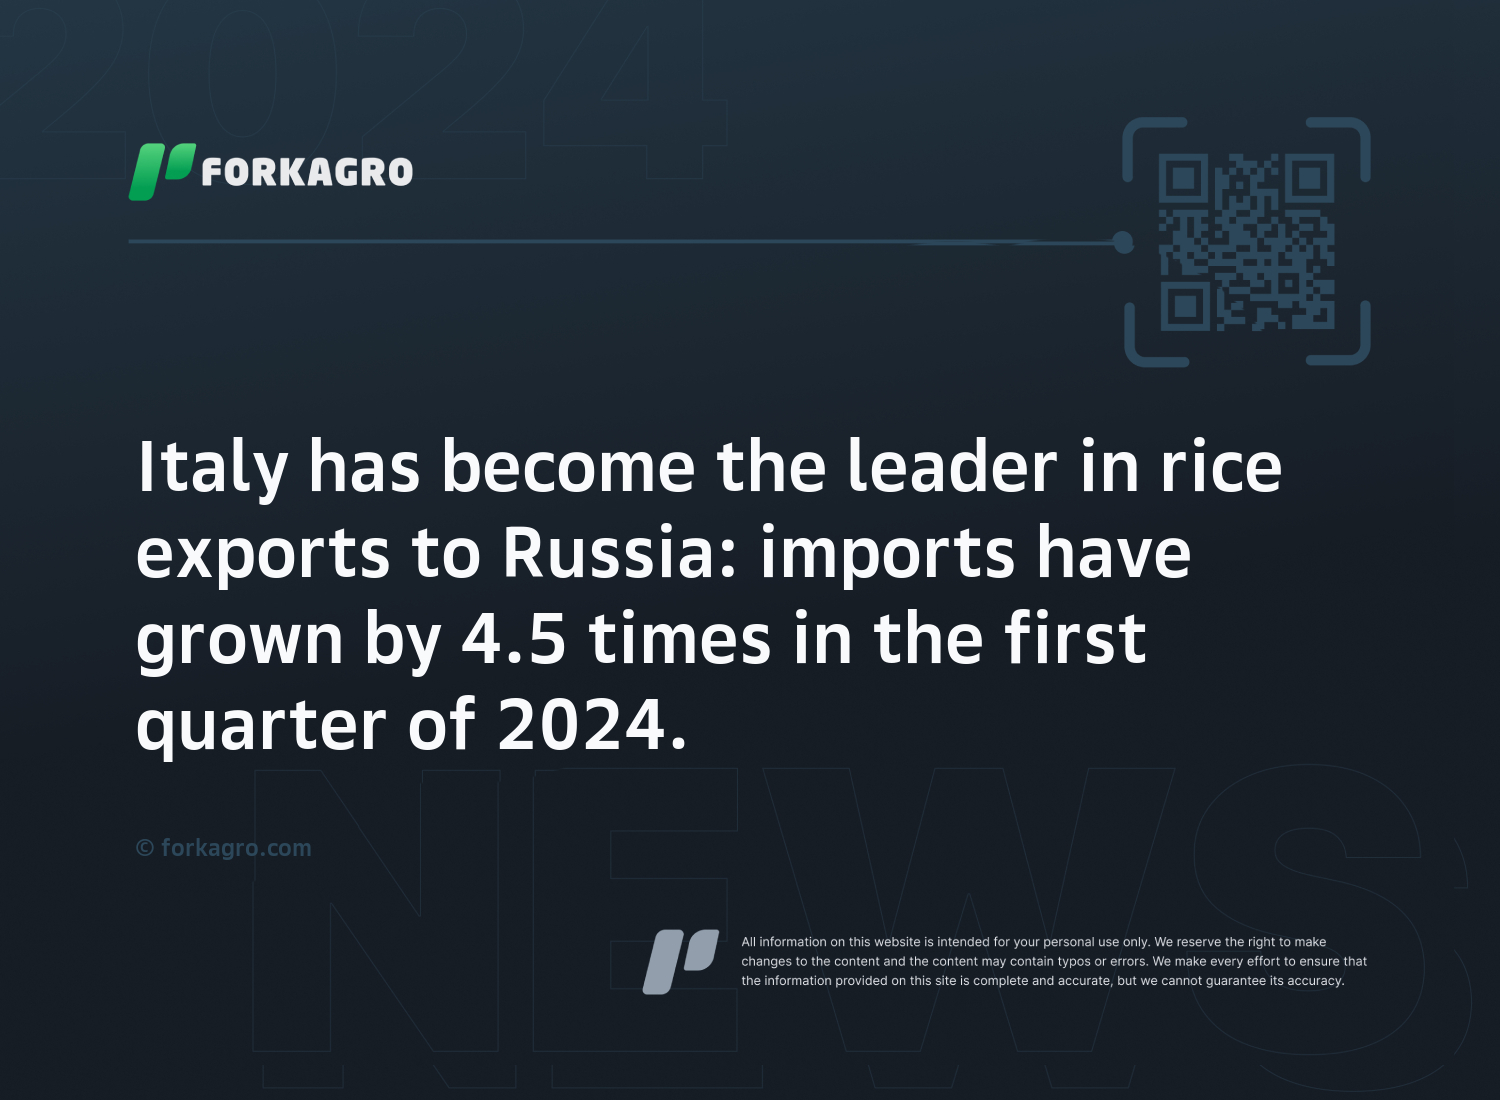 Italy has become the leader in rice exports to Russia: imports have grown by 4.5 times in the first quarter of 2024.